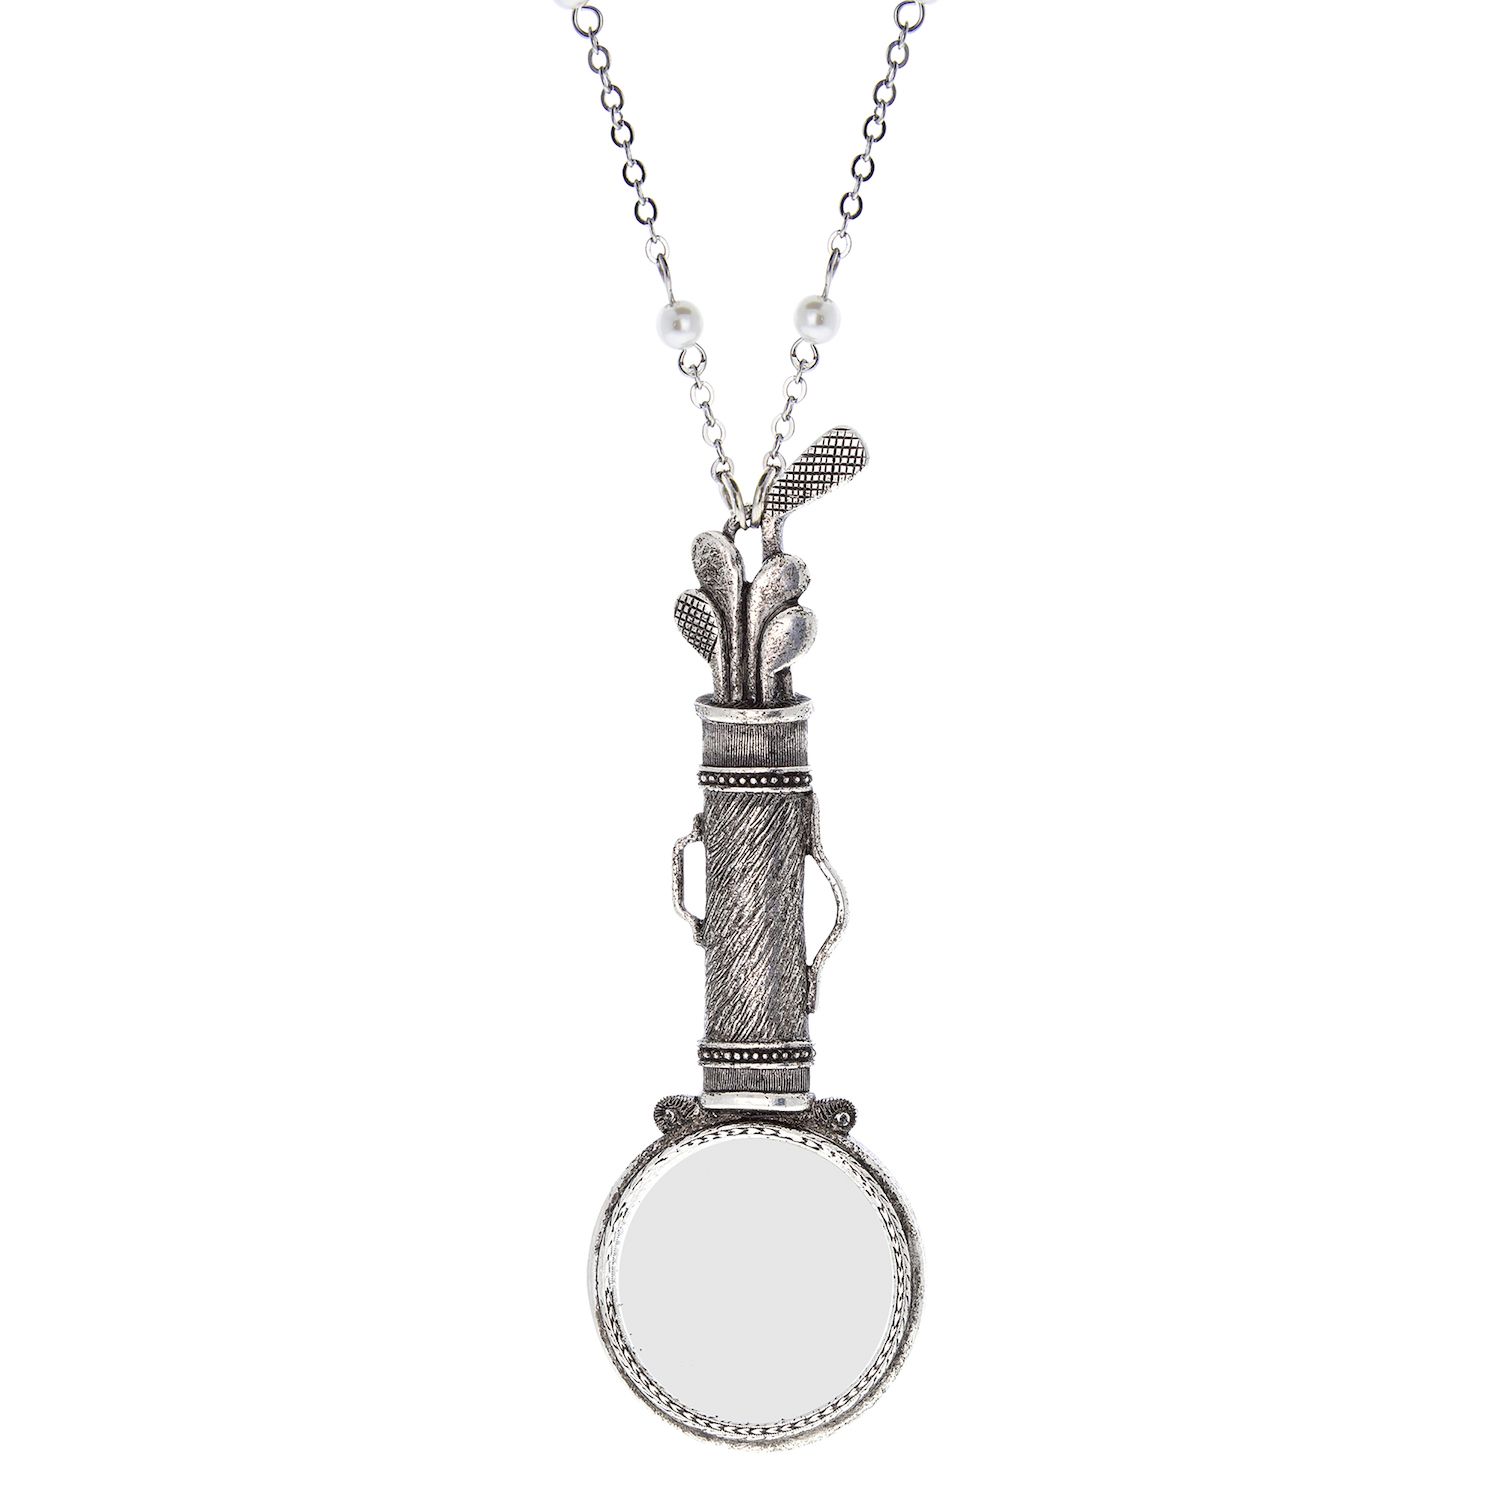 1928 Filigree Heart Magnifying Glass Necklace, Women's, Silver